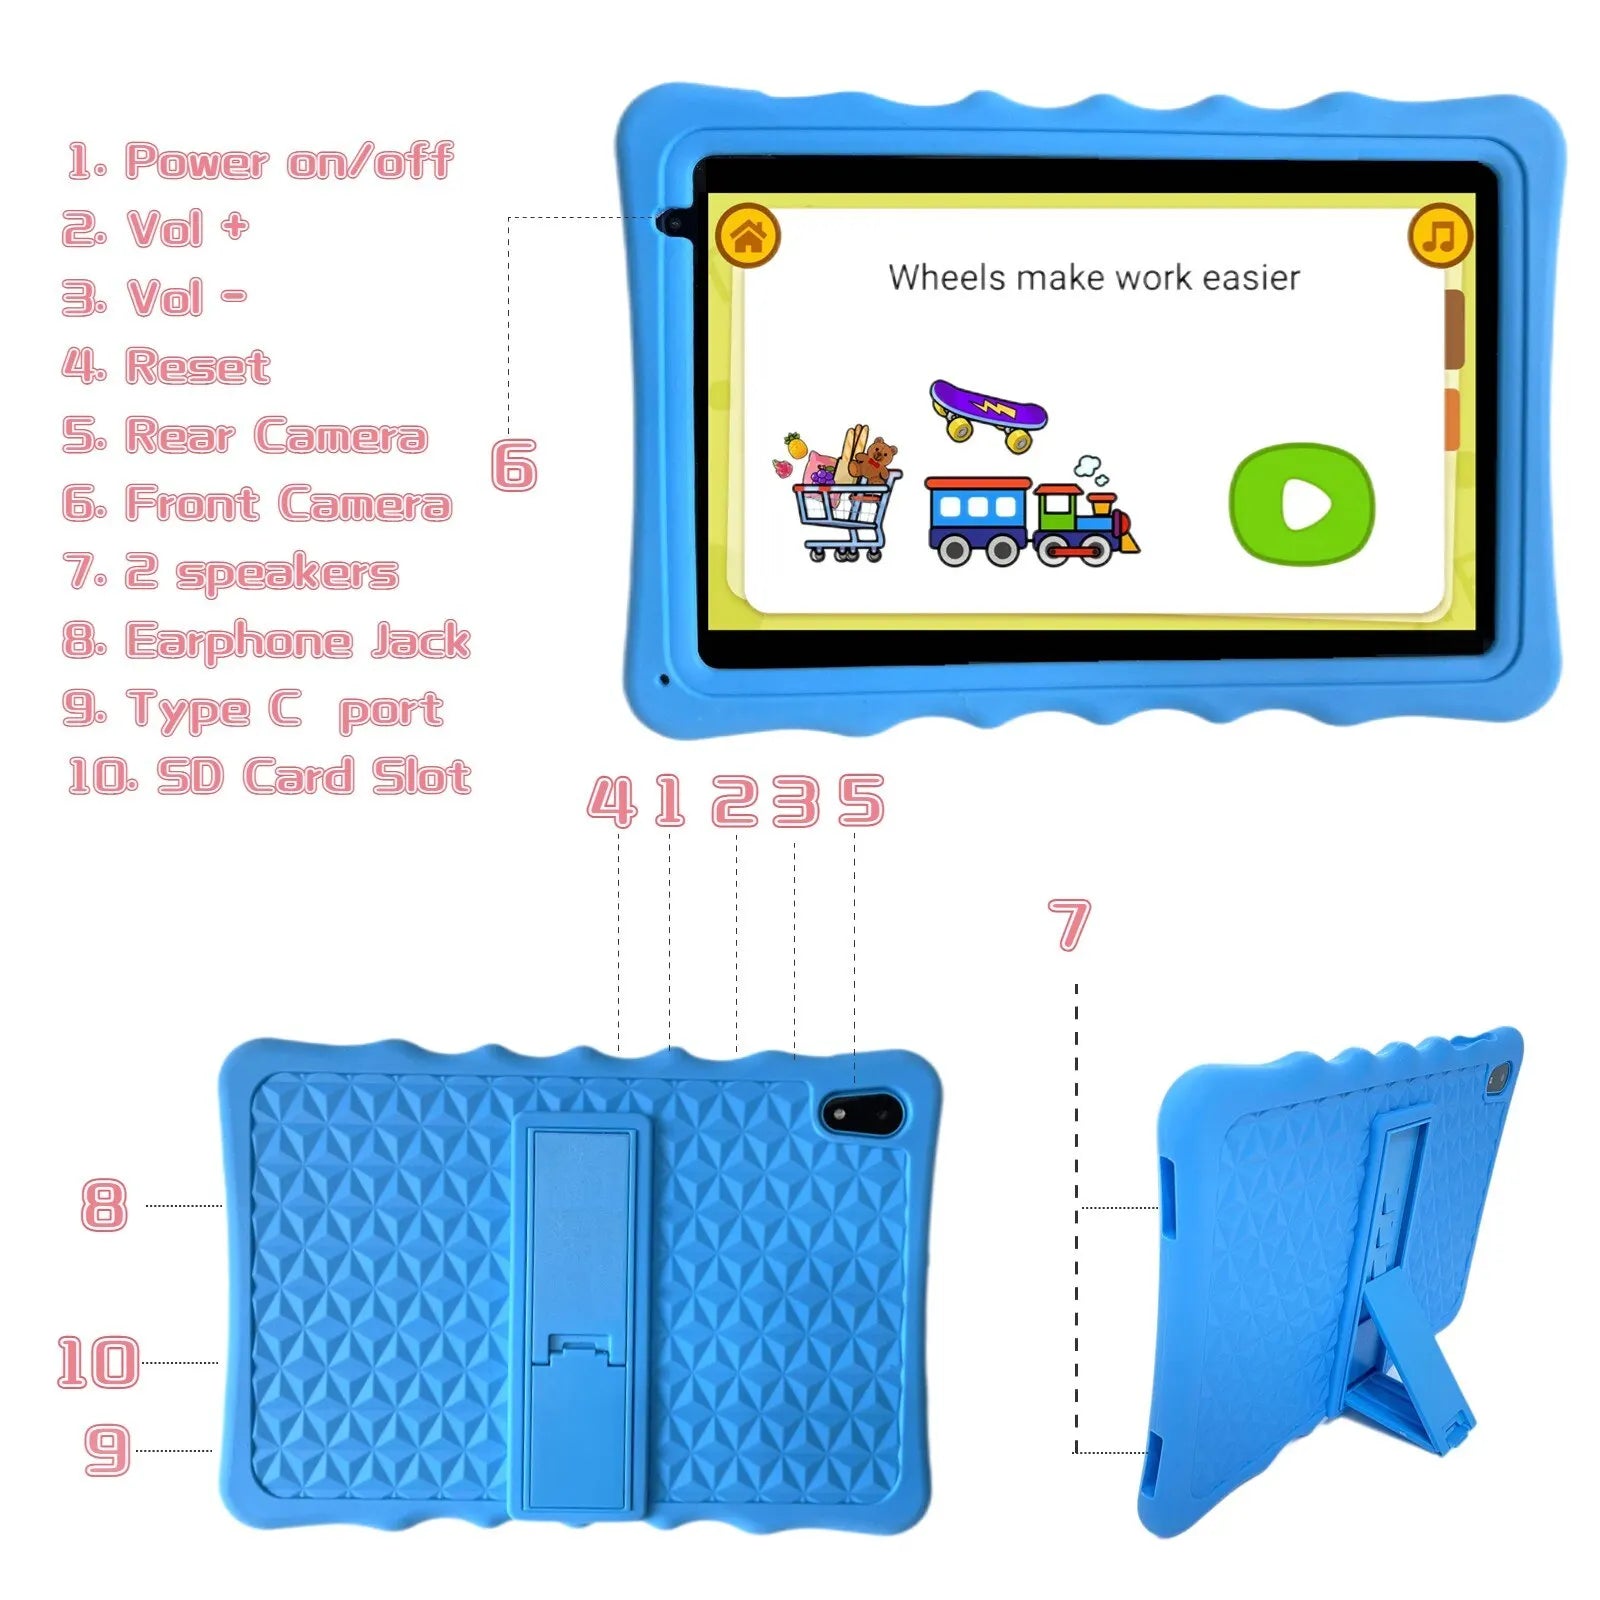 10.1inch Education Tablet Study Pad .Android11,64G HD Safety Eye Protection Screen, WiFi, Dual Camera,Montessori Education Toy.